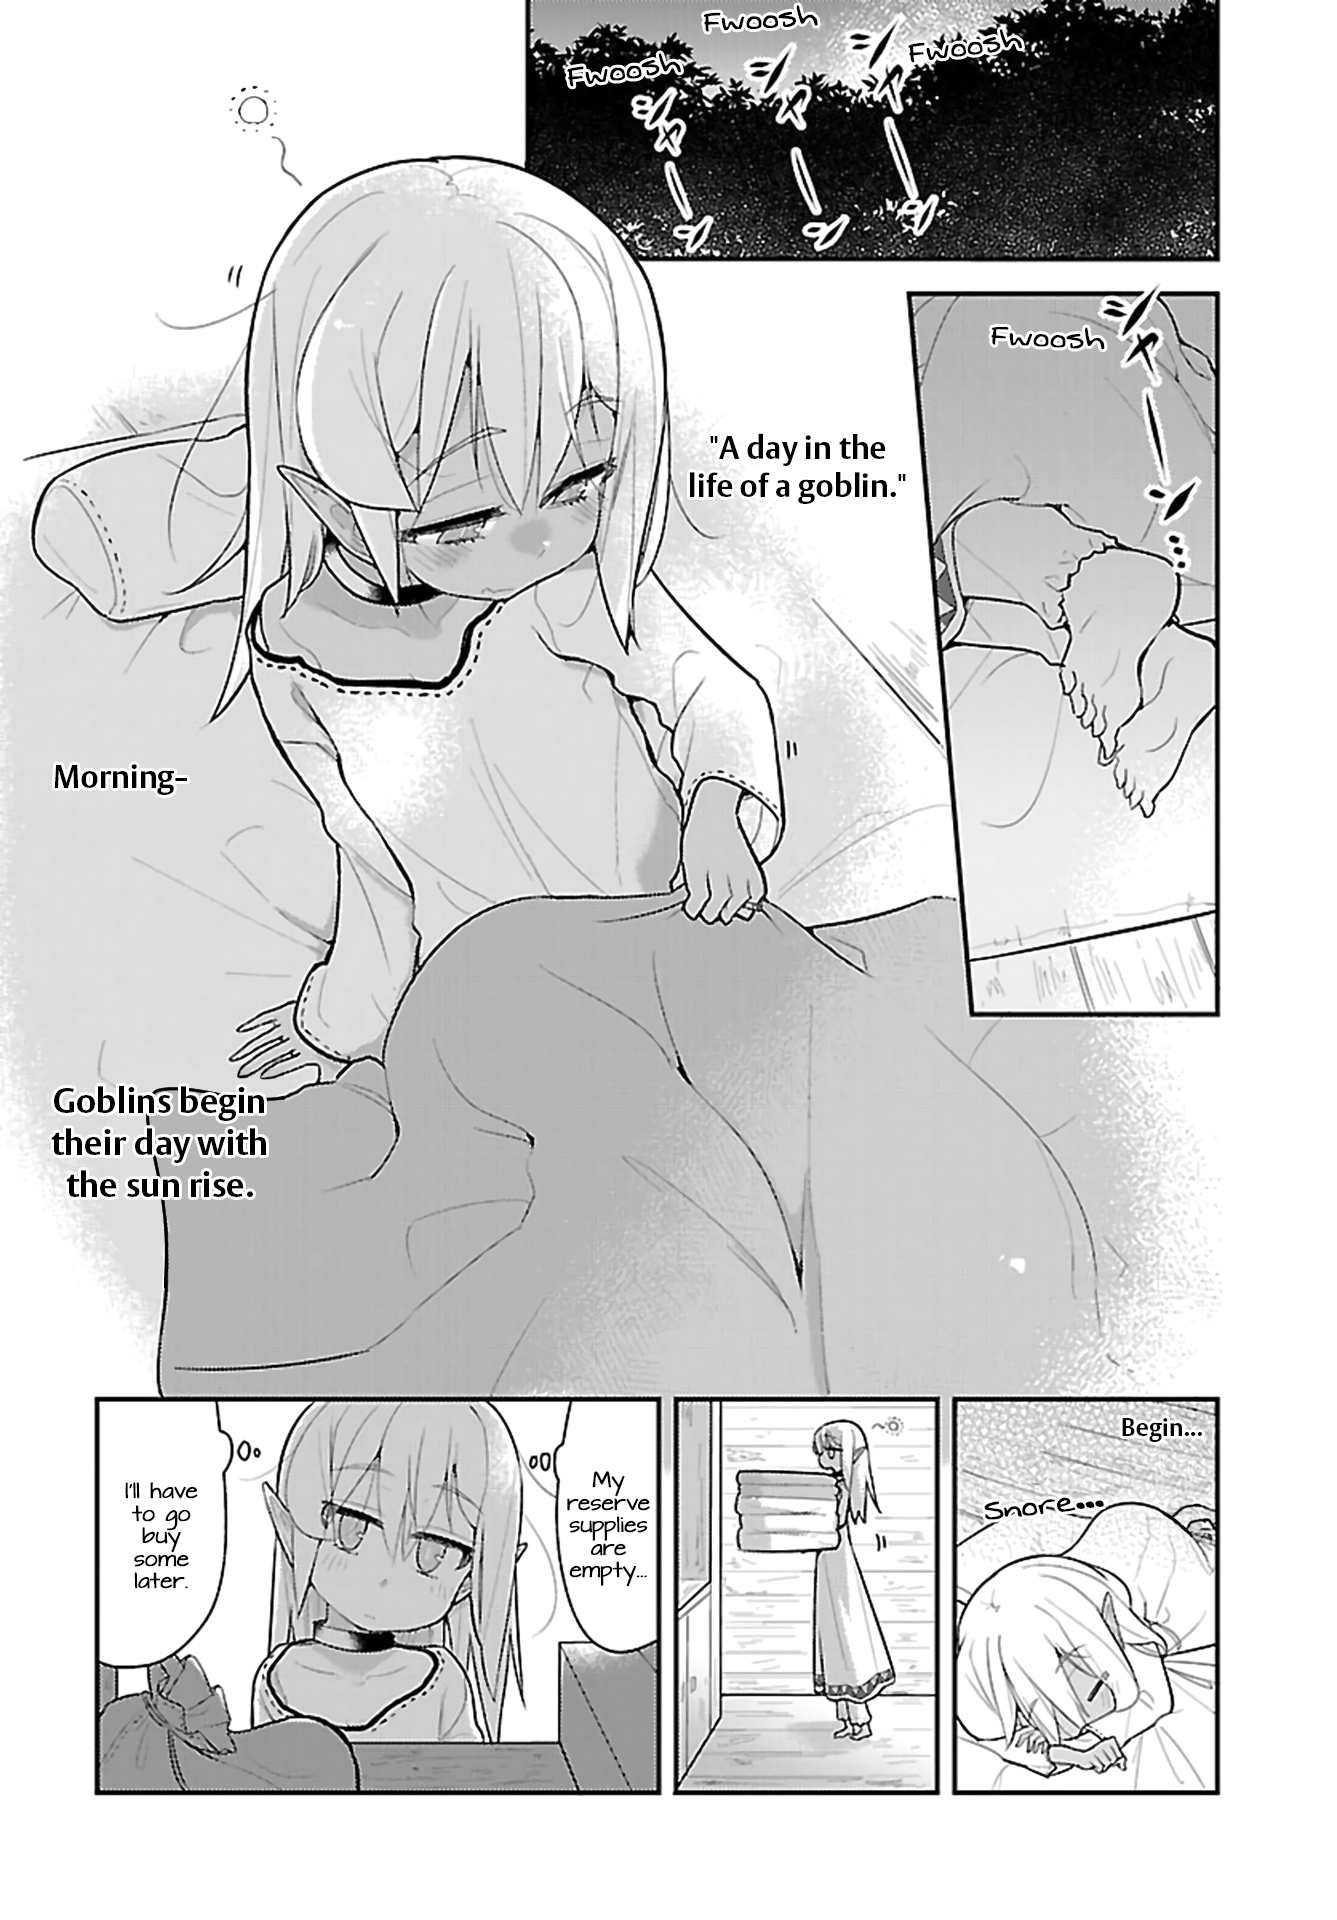 Goblin Is Very Strong - Page 2